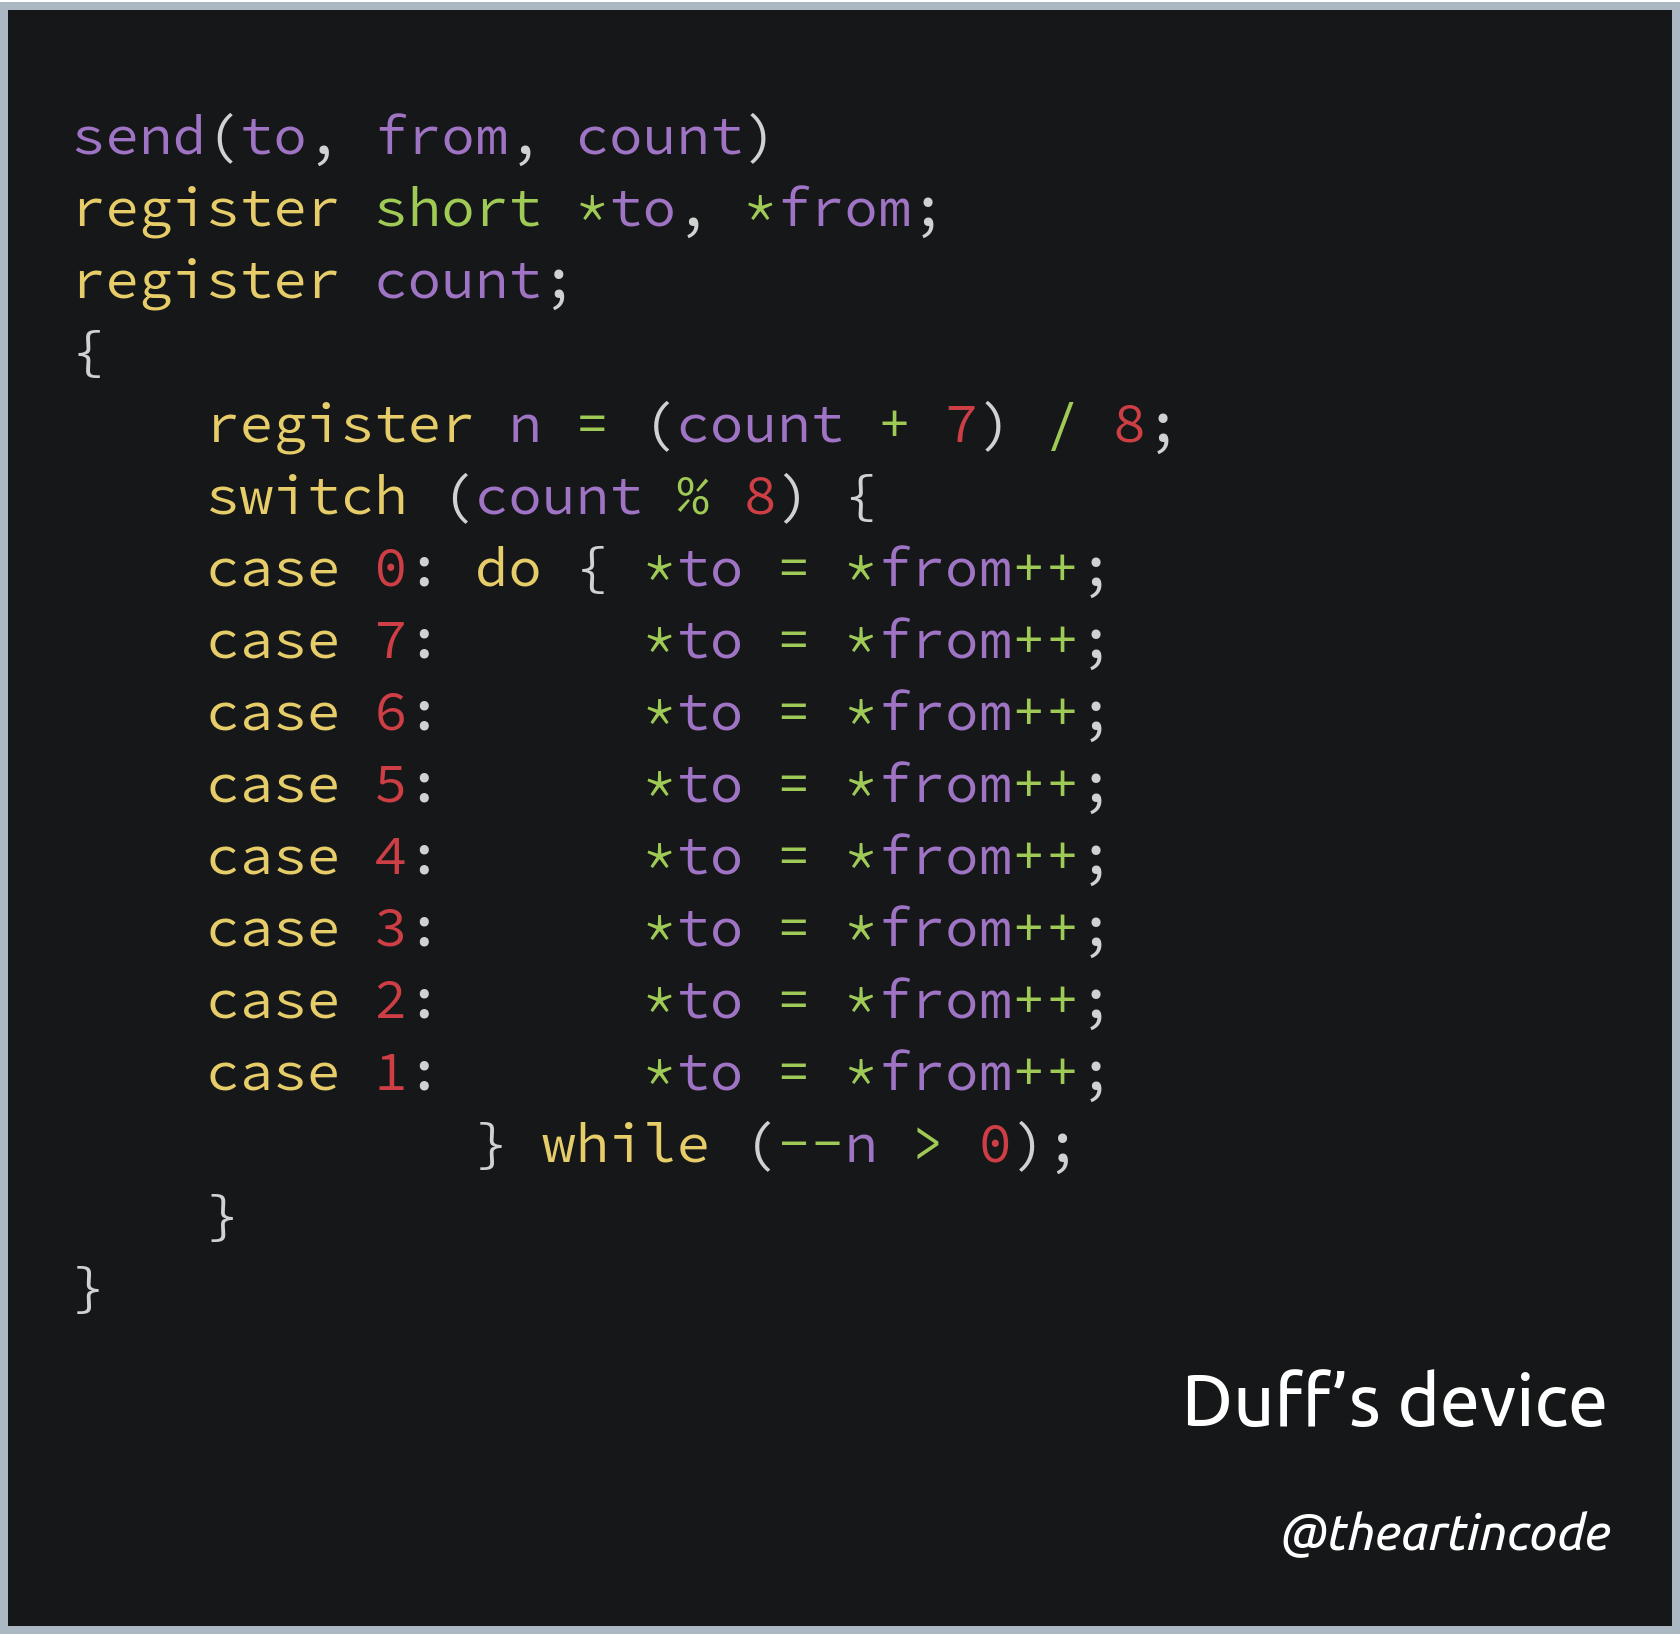 Code snippet of Duff's device